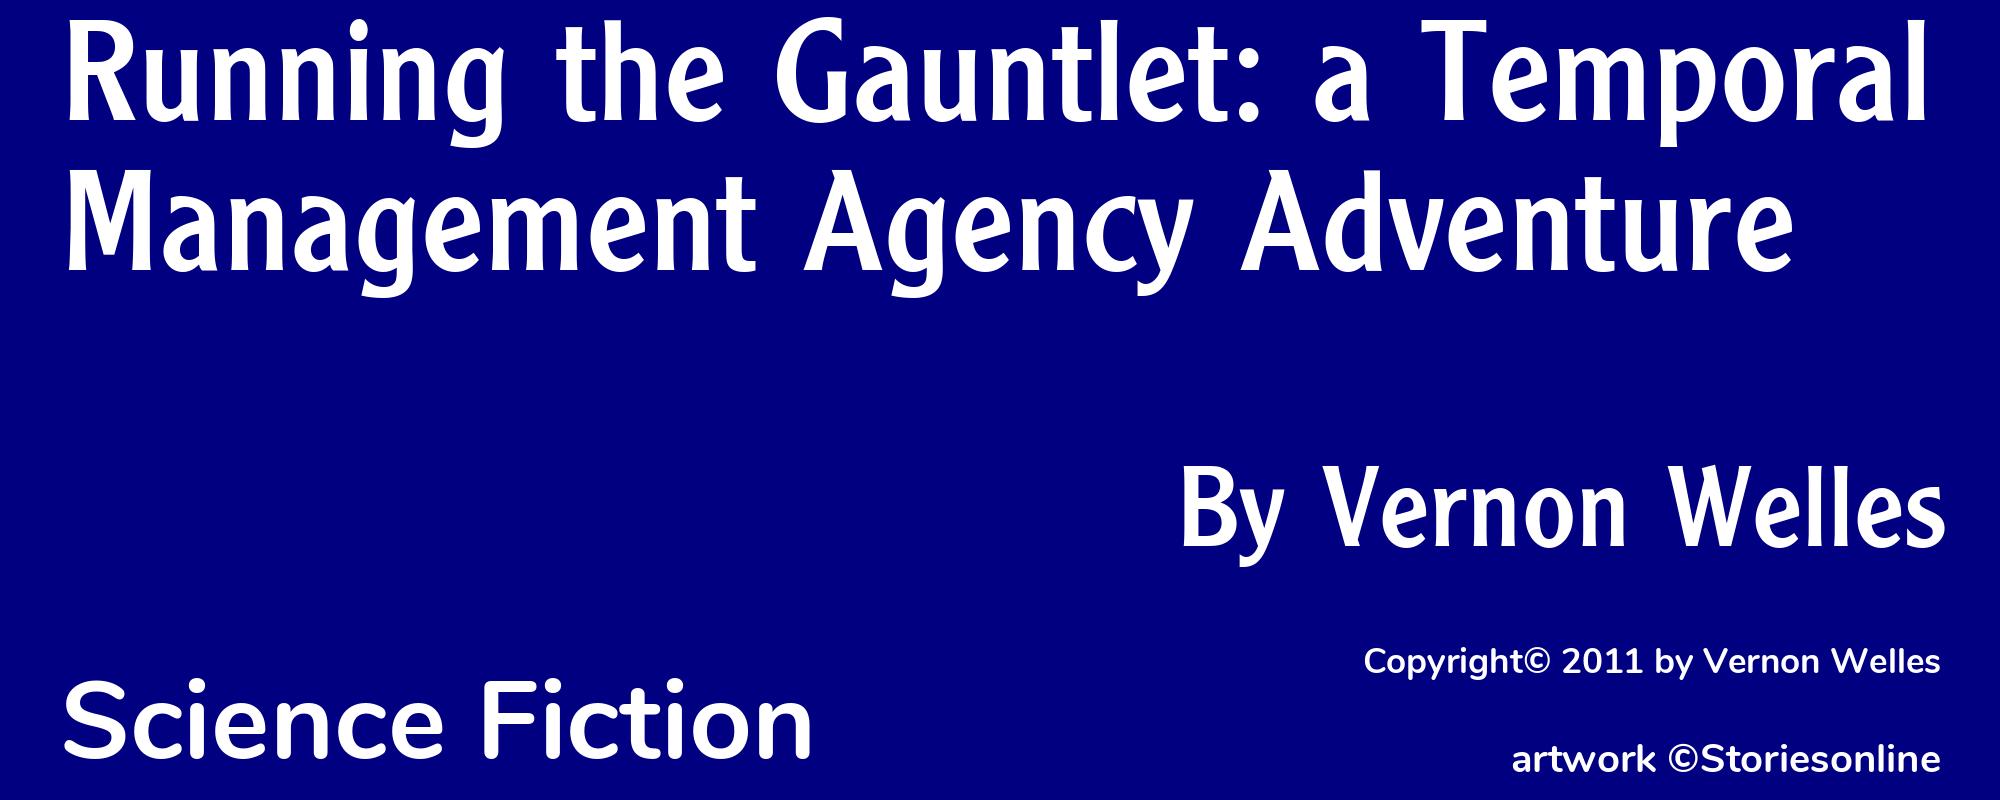 Running the Gauntlet: a Temporal Management Agency Adventure - Cover